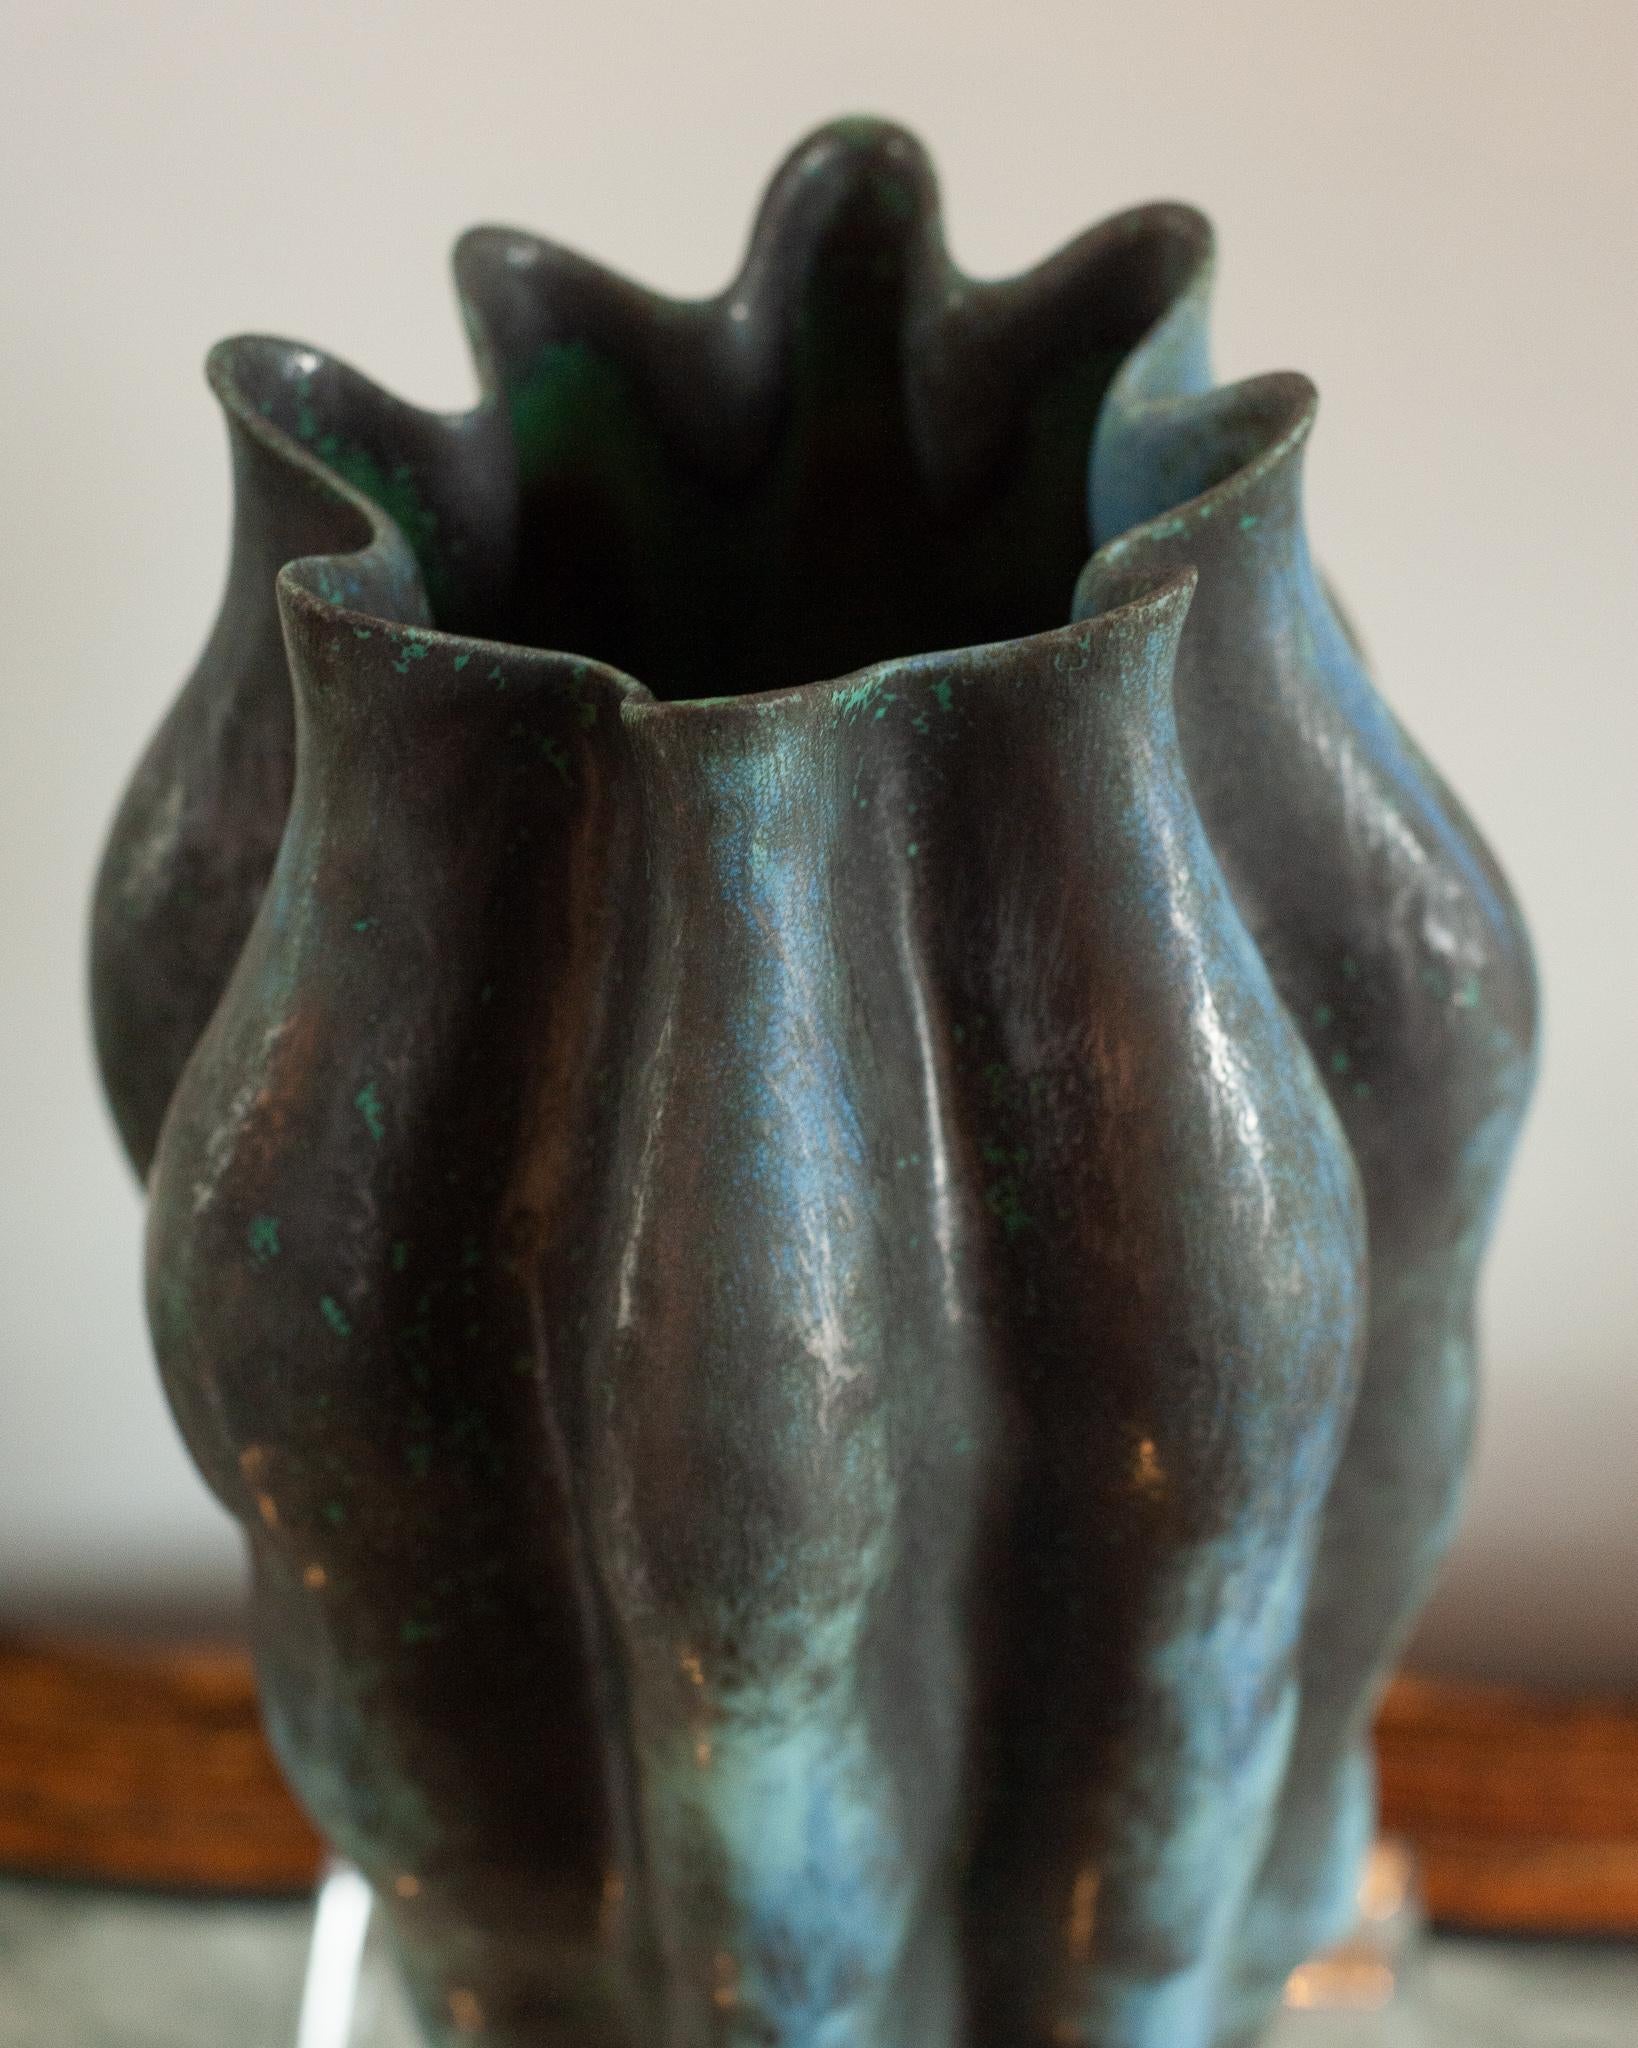 Portuguese Contemporary Large Green and Metallic Glazed Porcelain Vase For Sale